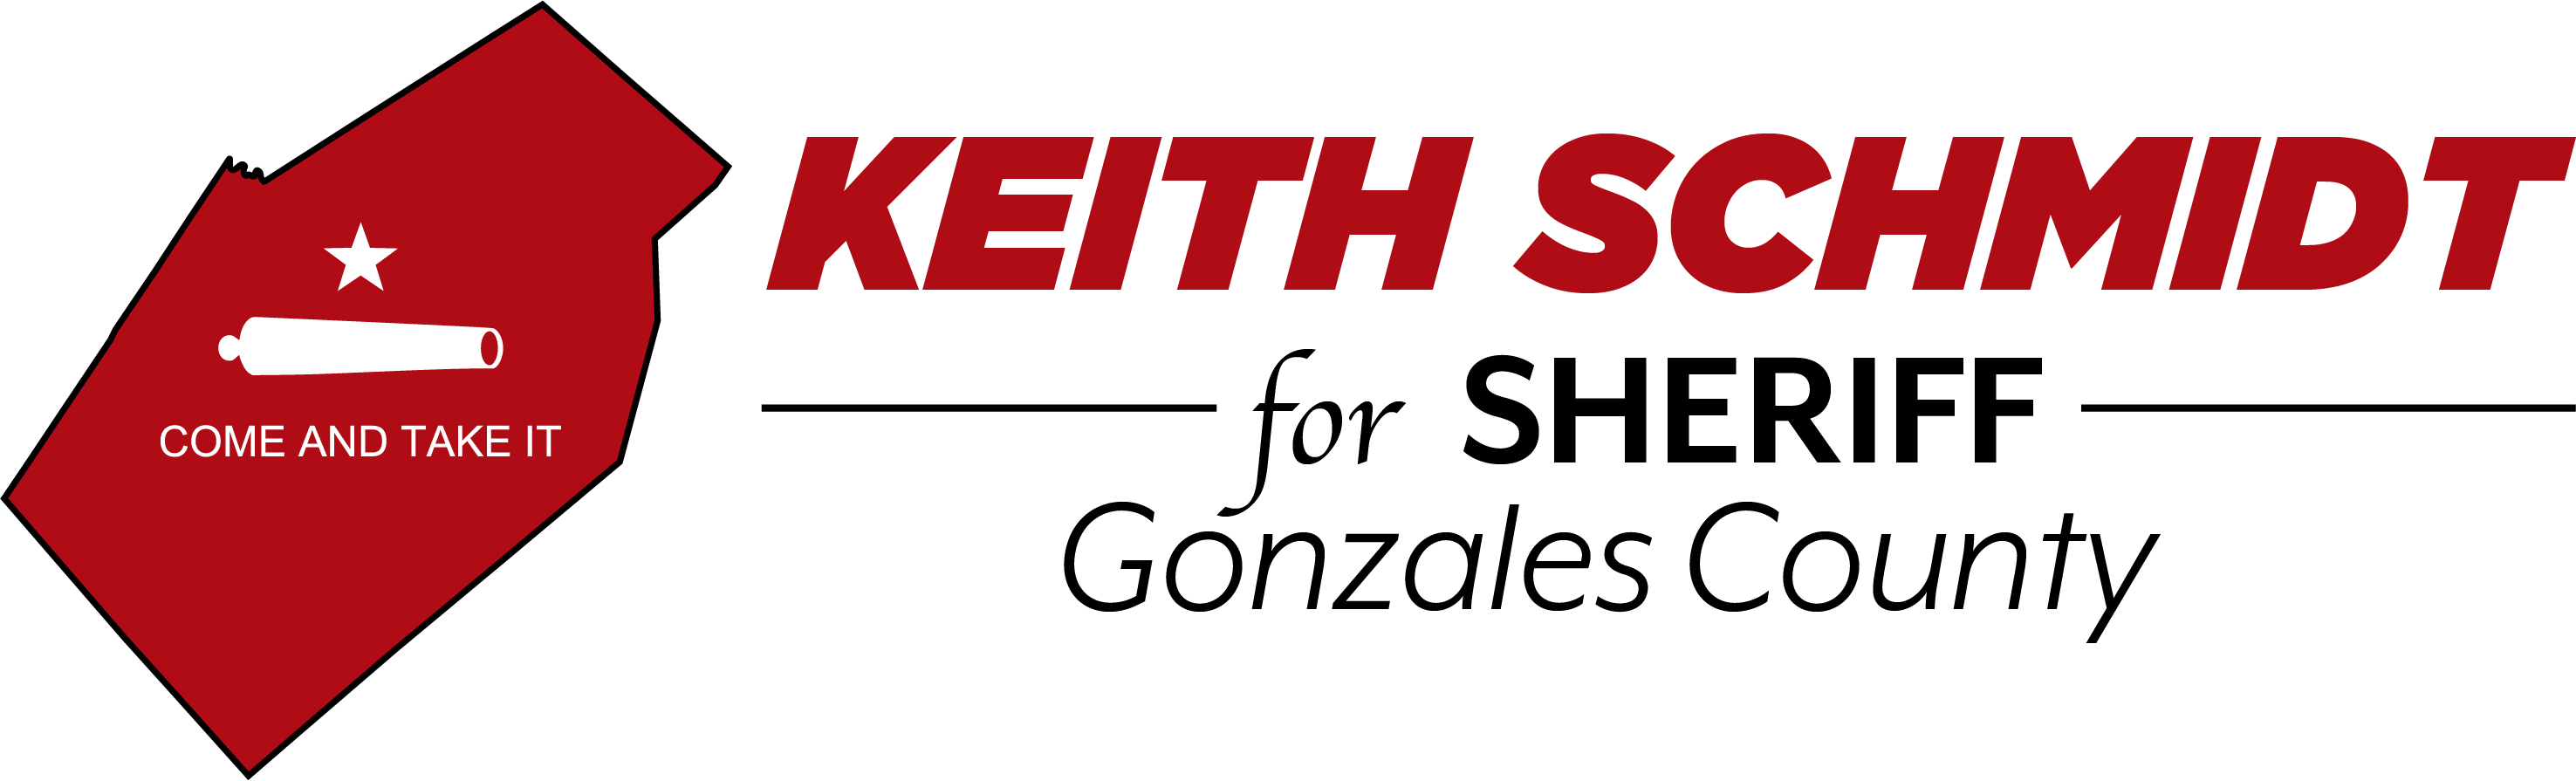 Keith Schmidt for Sheriff  